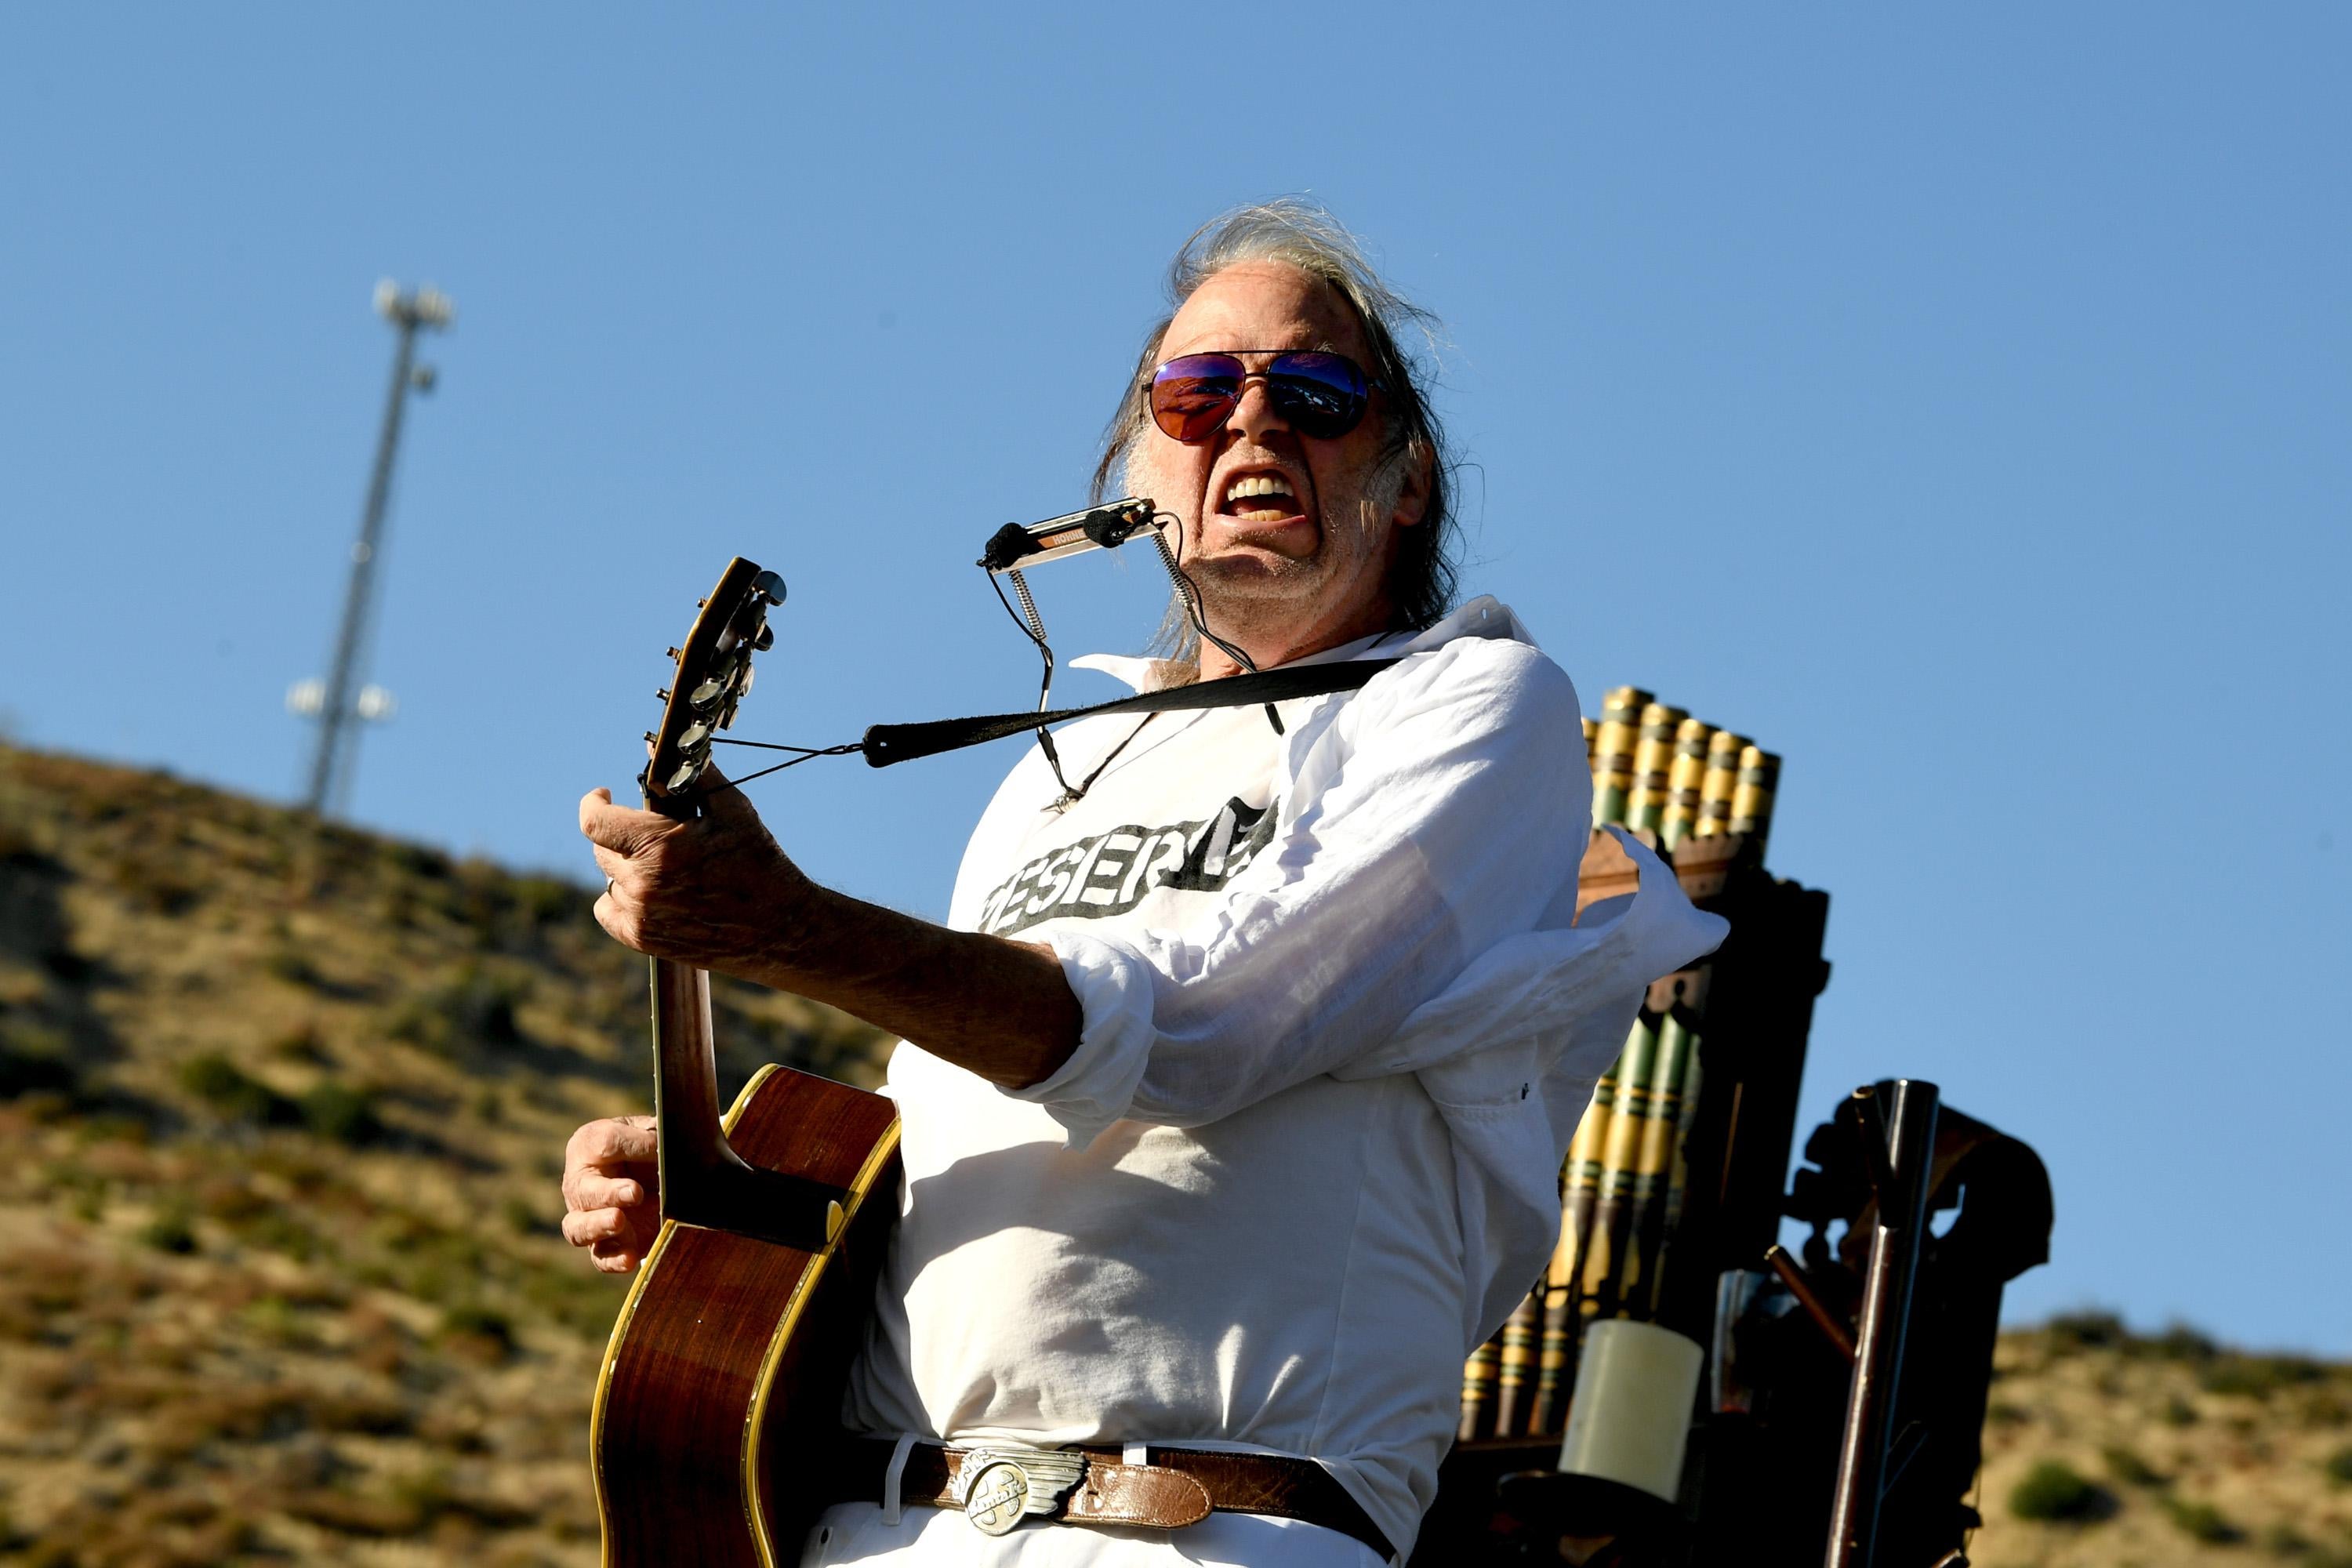 Neil Young carries a guitar and harmonica while performing onstage.